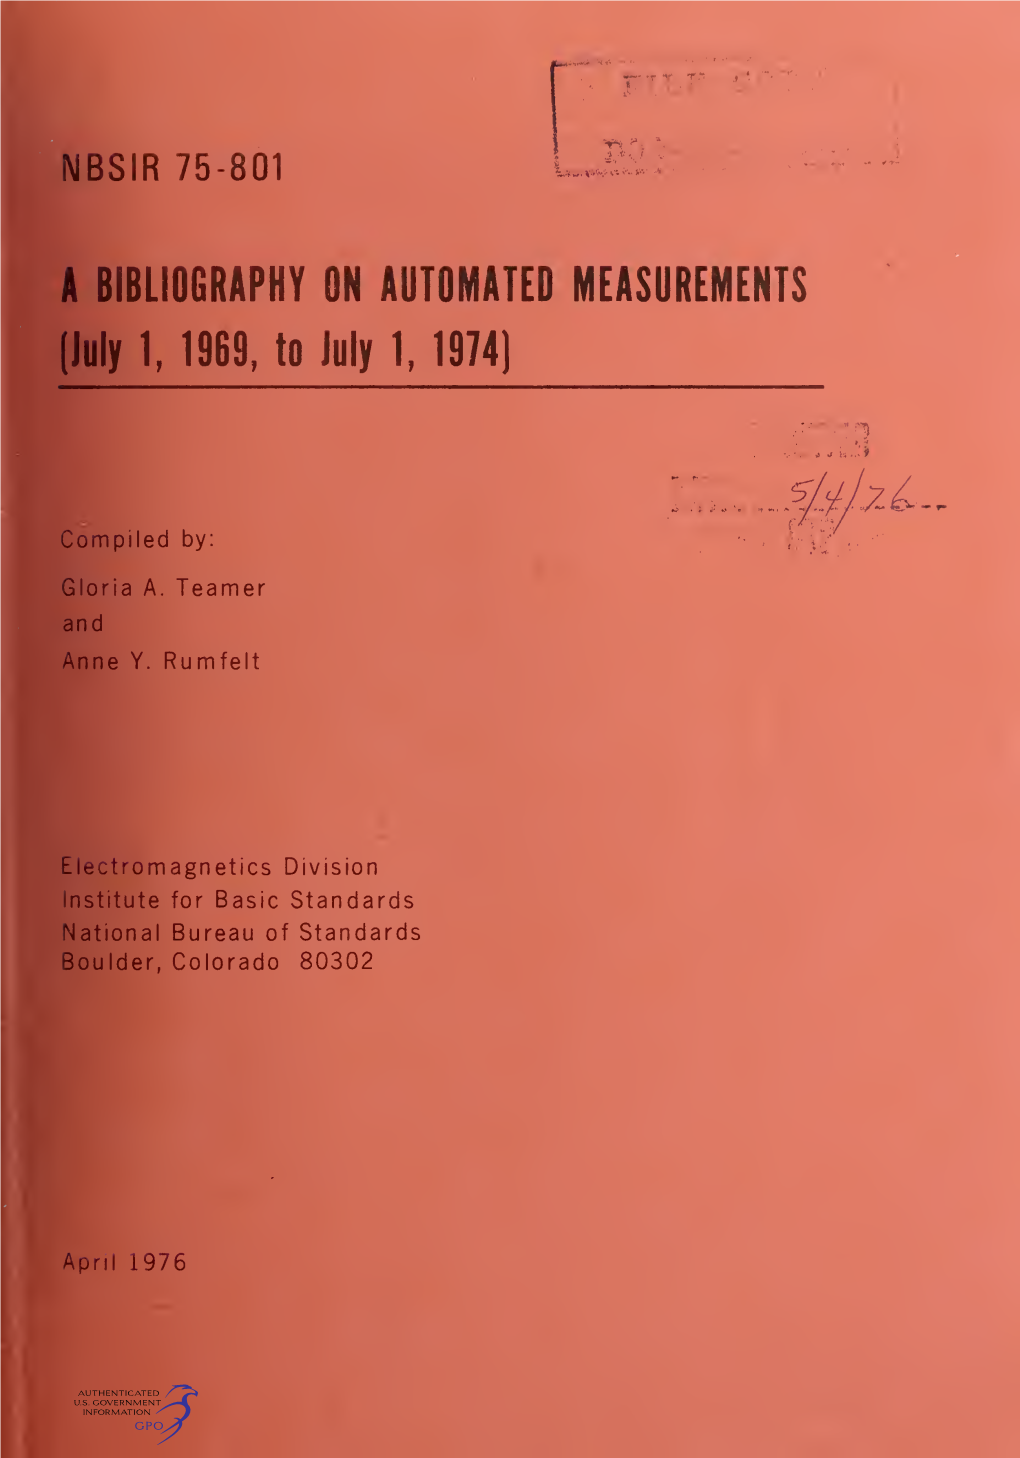 A Bibliography on Automated Measurements